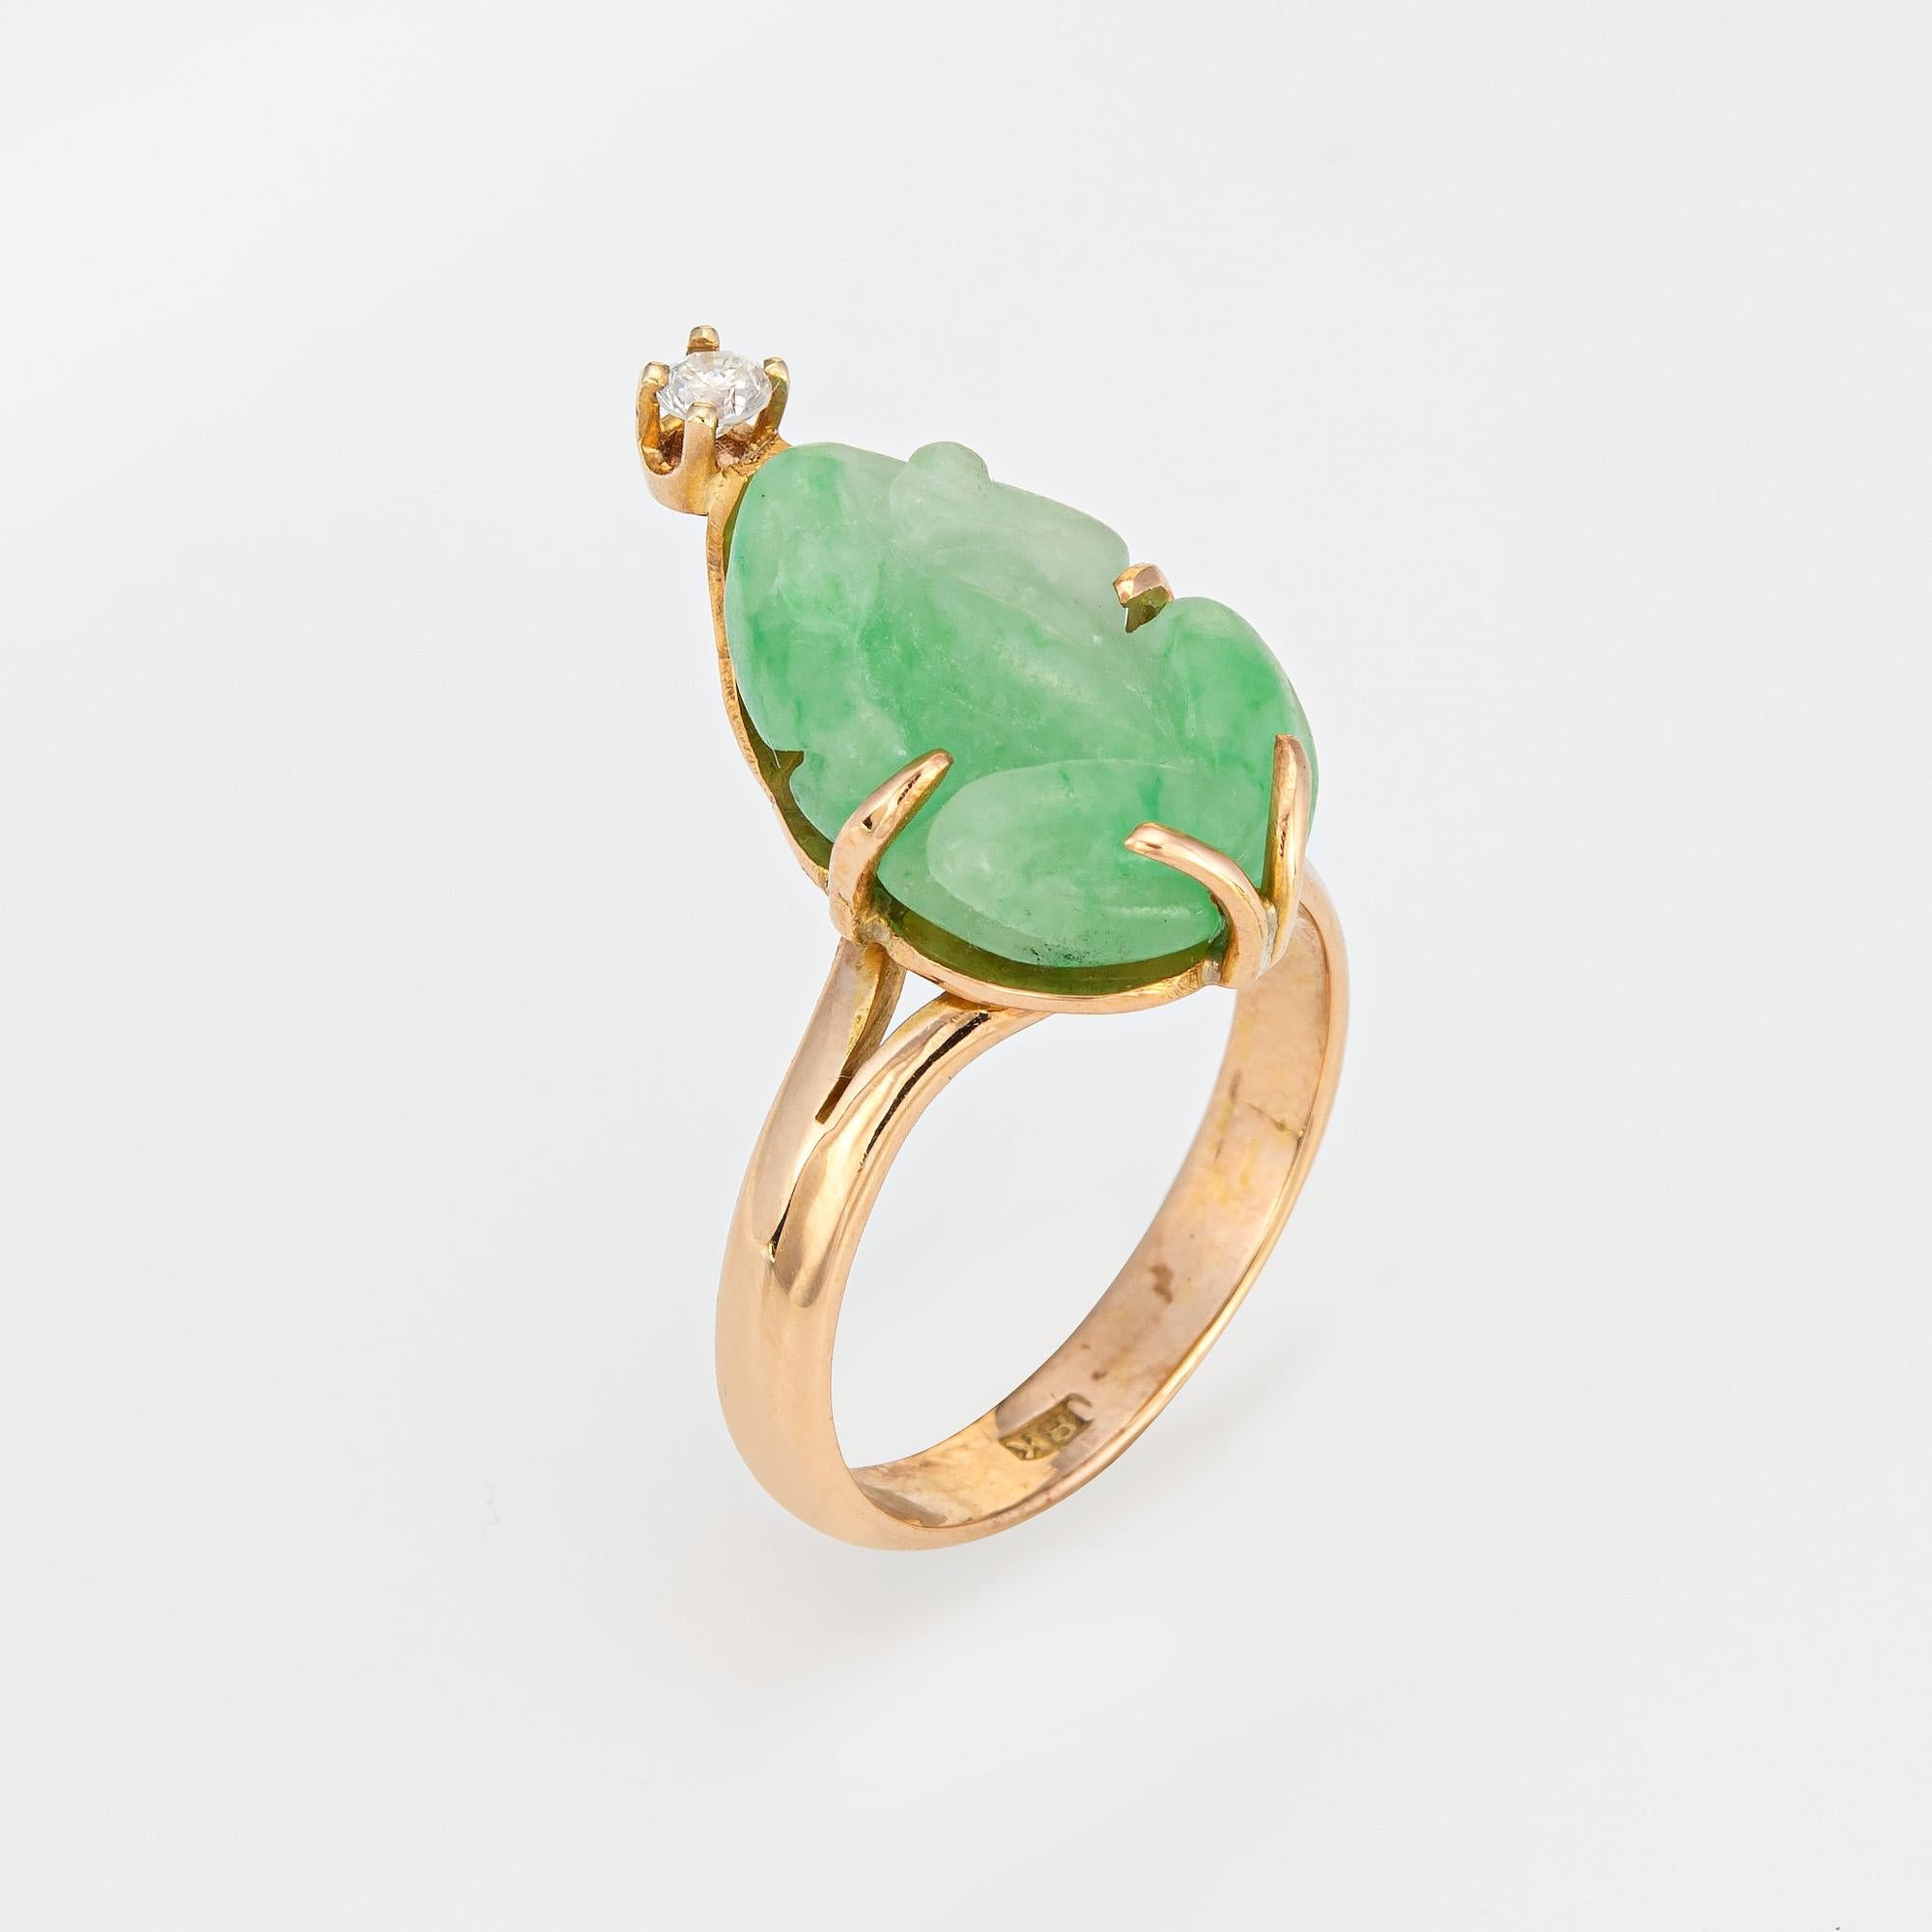 Stylish vintage carved jade frog & diamond ring (circa 1960s to 1970s) crafted in 14 karat yellow gold. 

Carved jade measures 13mm x 9mm. One diamond is estimated at 0.03 carats (estimated at I-J color and I1 clarity). The jade is in good condition